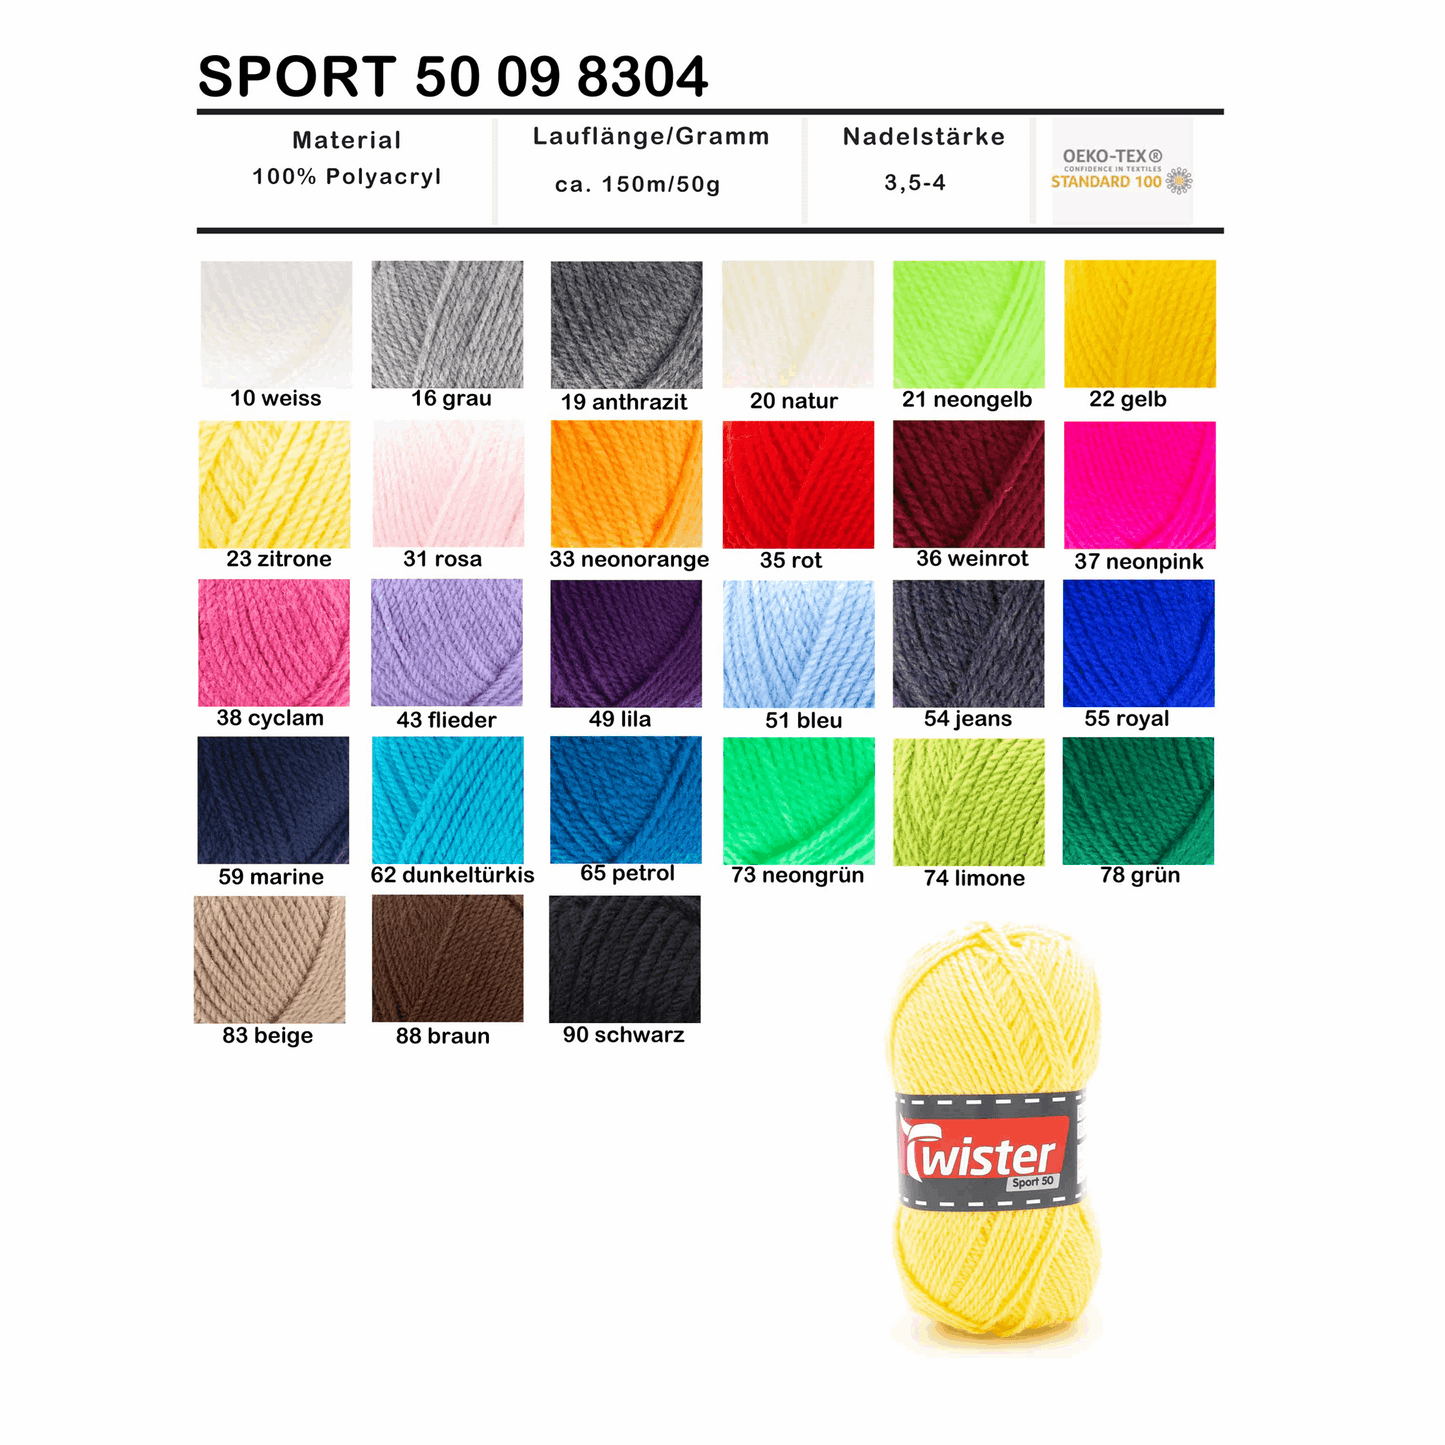 Twister Sport, 50g, 98304, color neon yellow 21